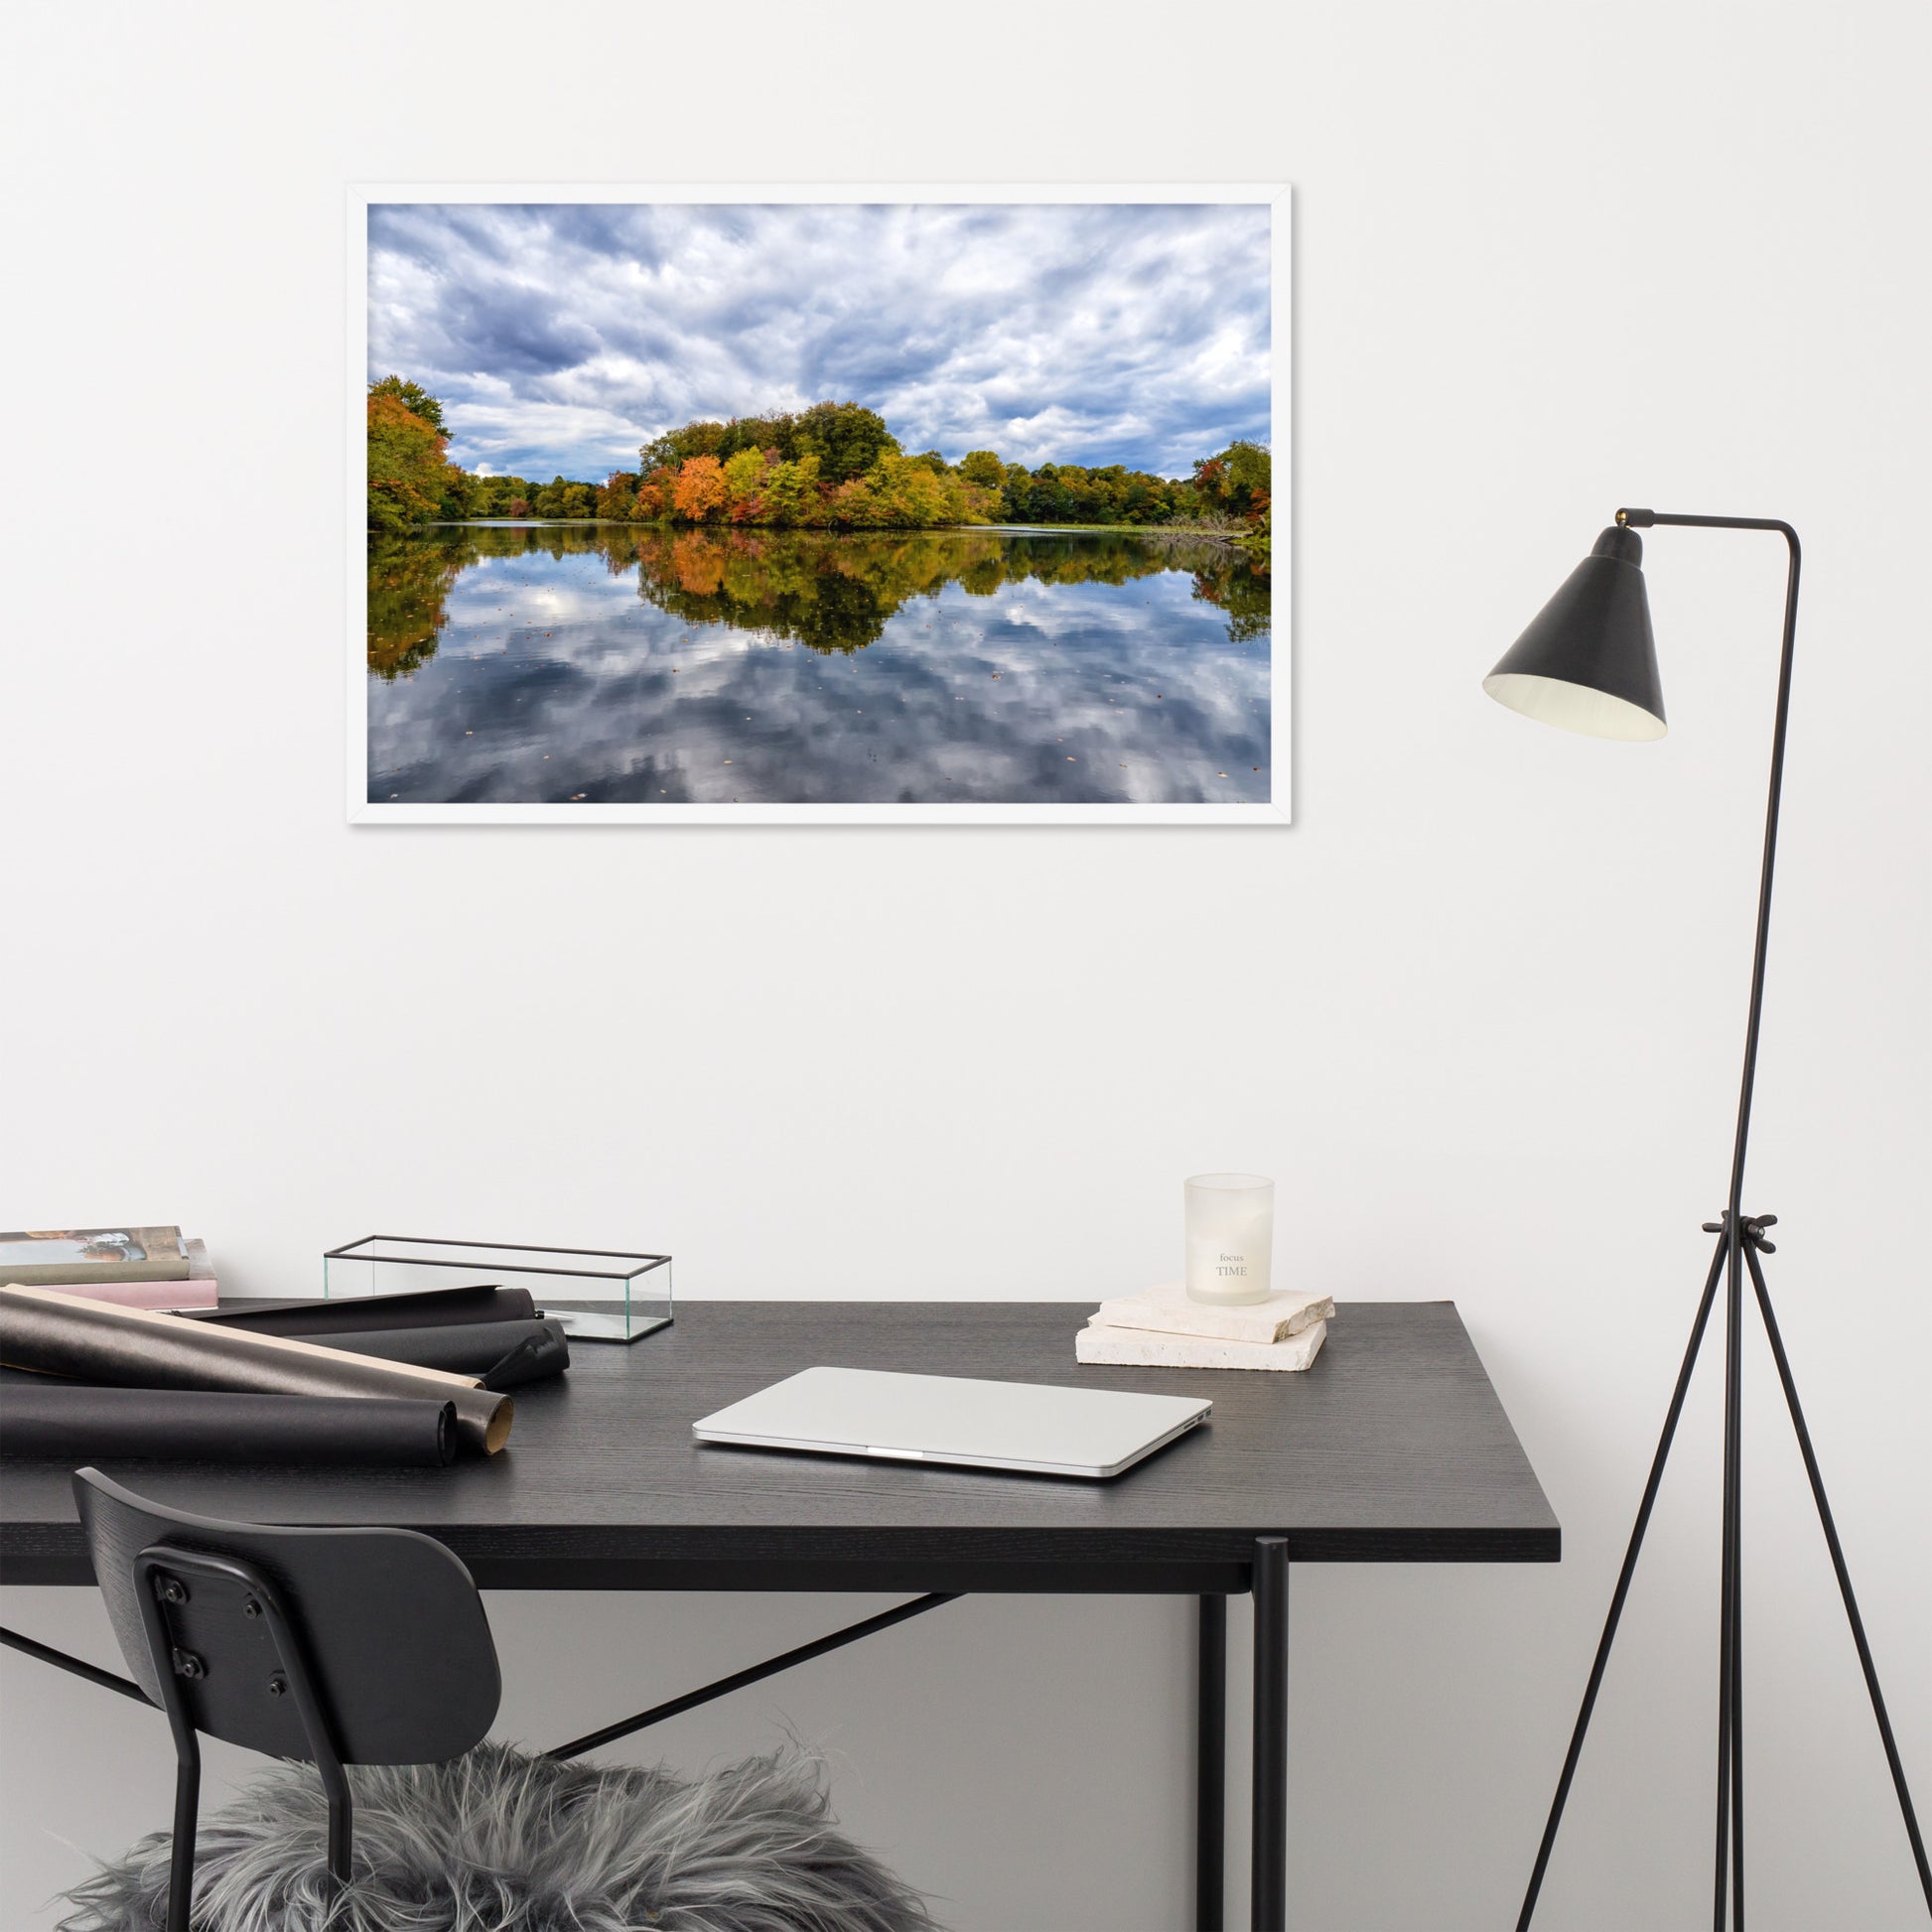 Wall Art For Office At Home: Autumn Reflections - Rural / Country / Farmhouse Style Landscape / Nature Photograph Framed Wall Art Print - Artwork